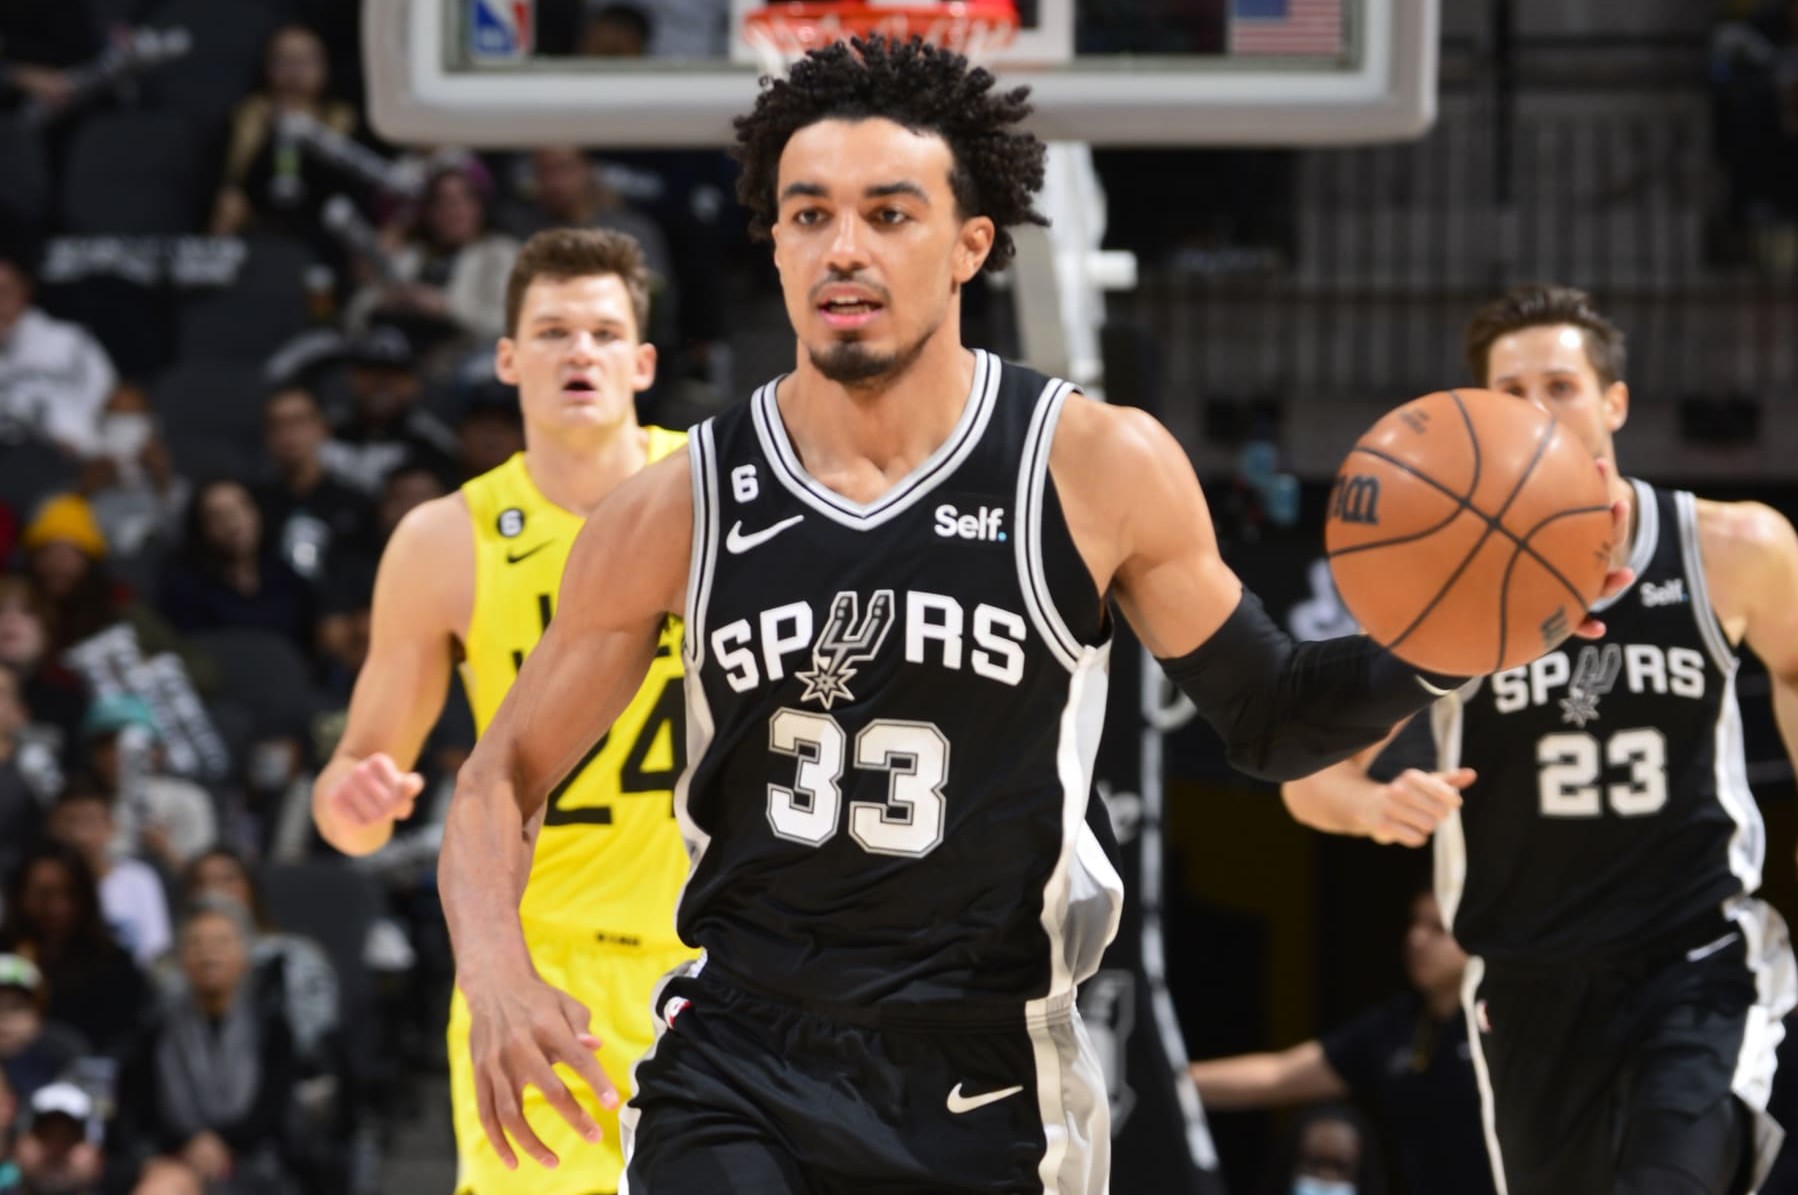 Tre Jones is too valuable for the Spurs to let him walk in Free Agency